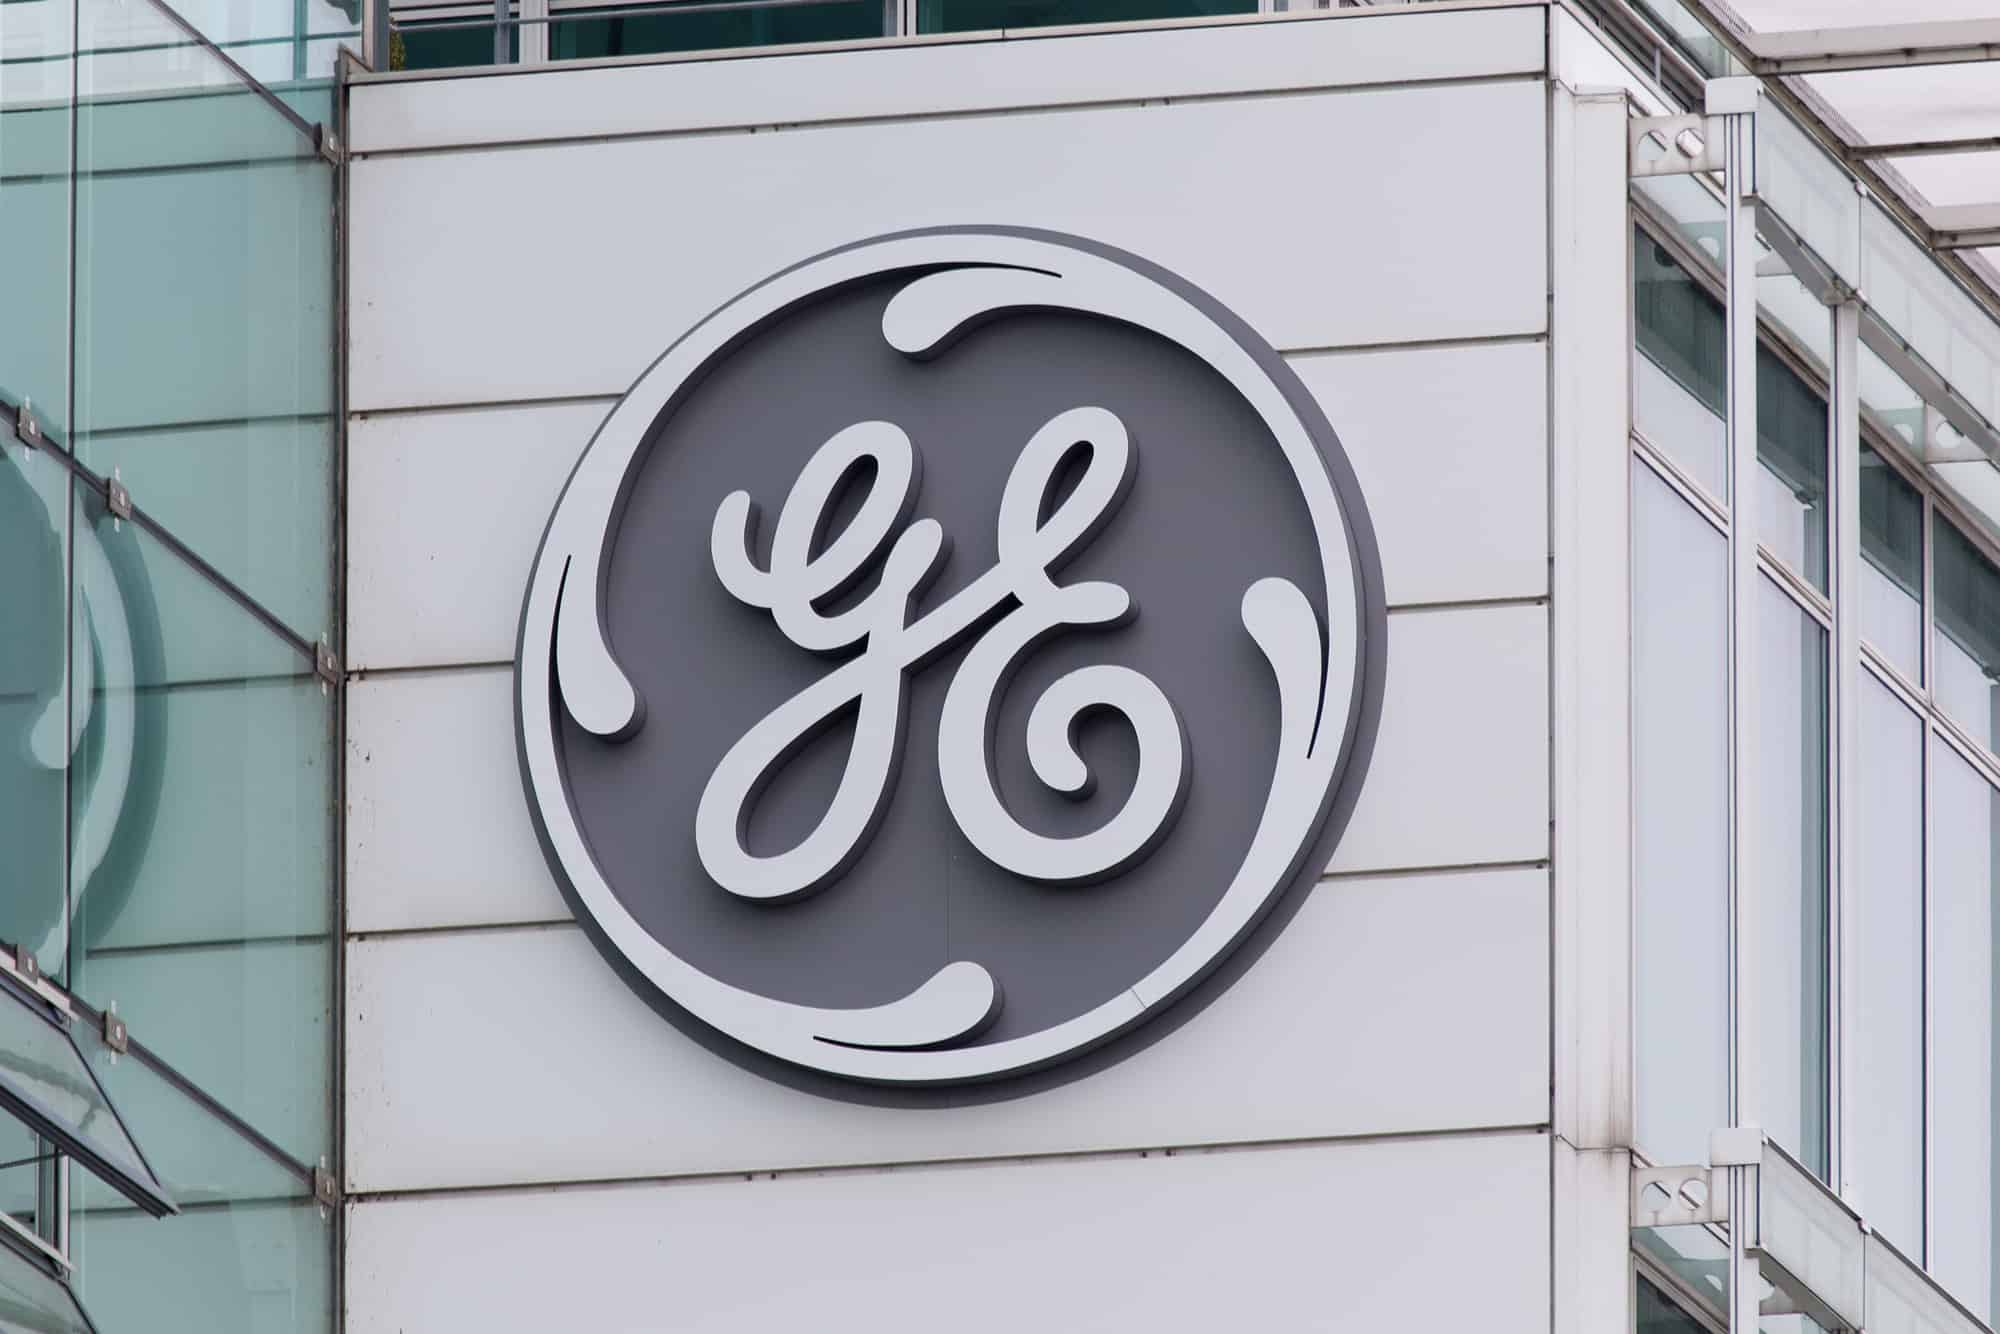 What is GE?